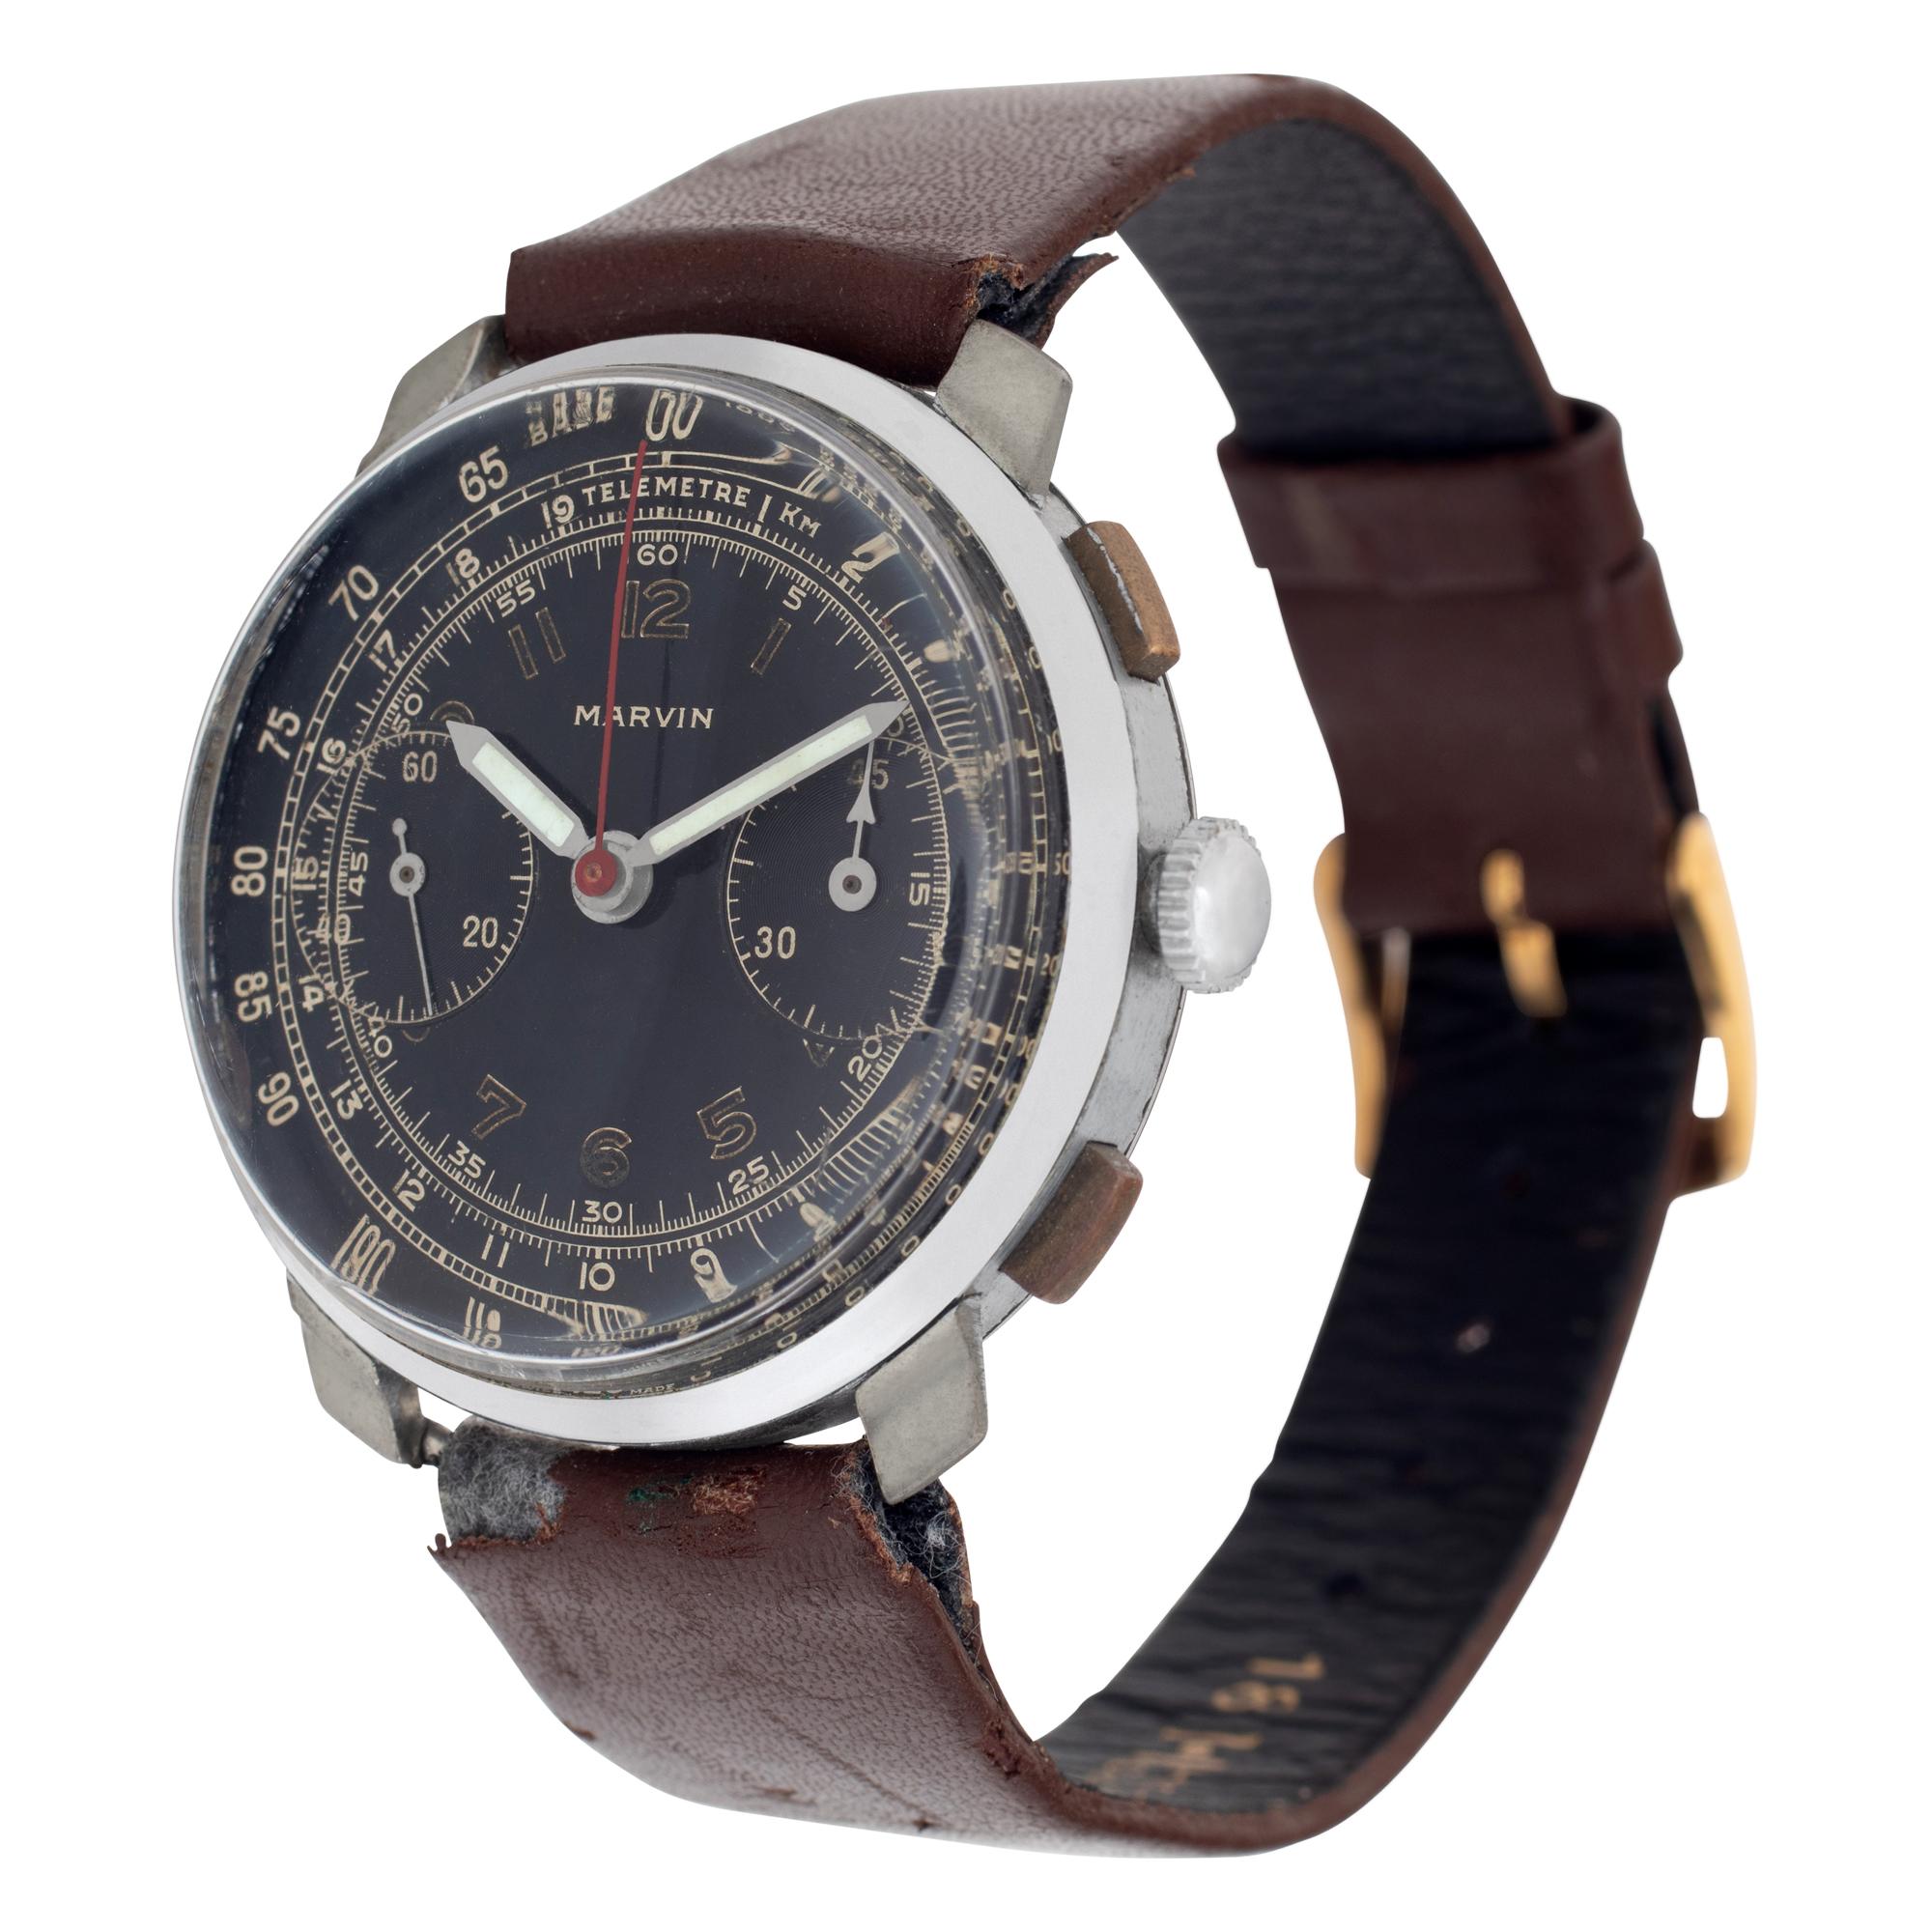 Vintage Marvin chronograph with stainless steel case, stainless steel bezel watch with  brown leather band with tang buckle. Manual wind. Fine Pre-owned Marvin Watch. Certified preowned Vintage Marvin watch is made out of Stainless steel on a Brown